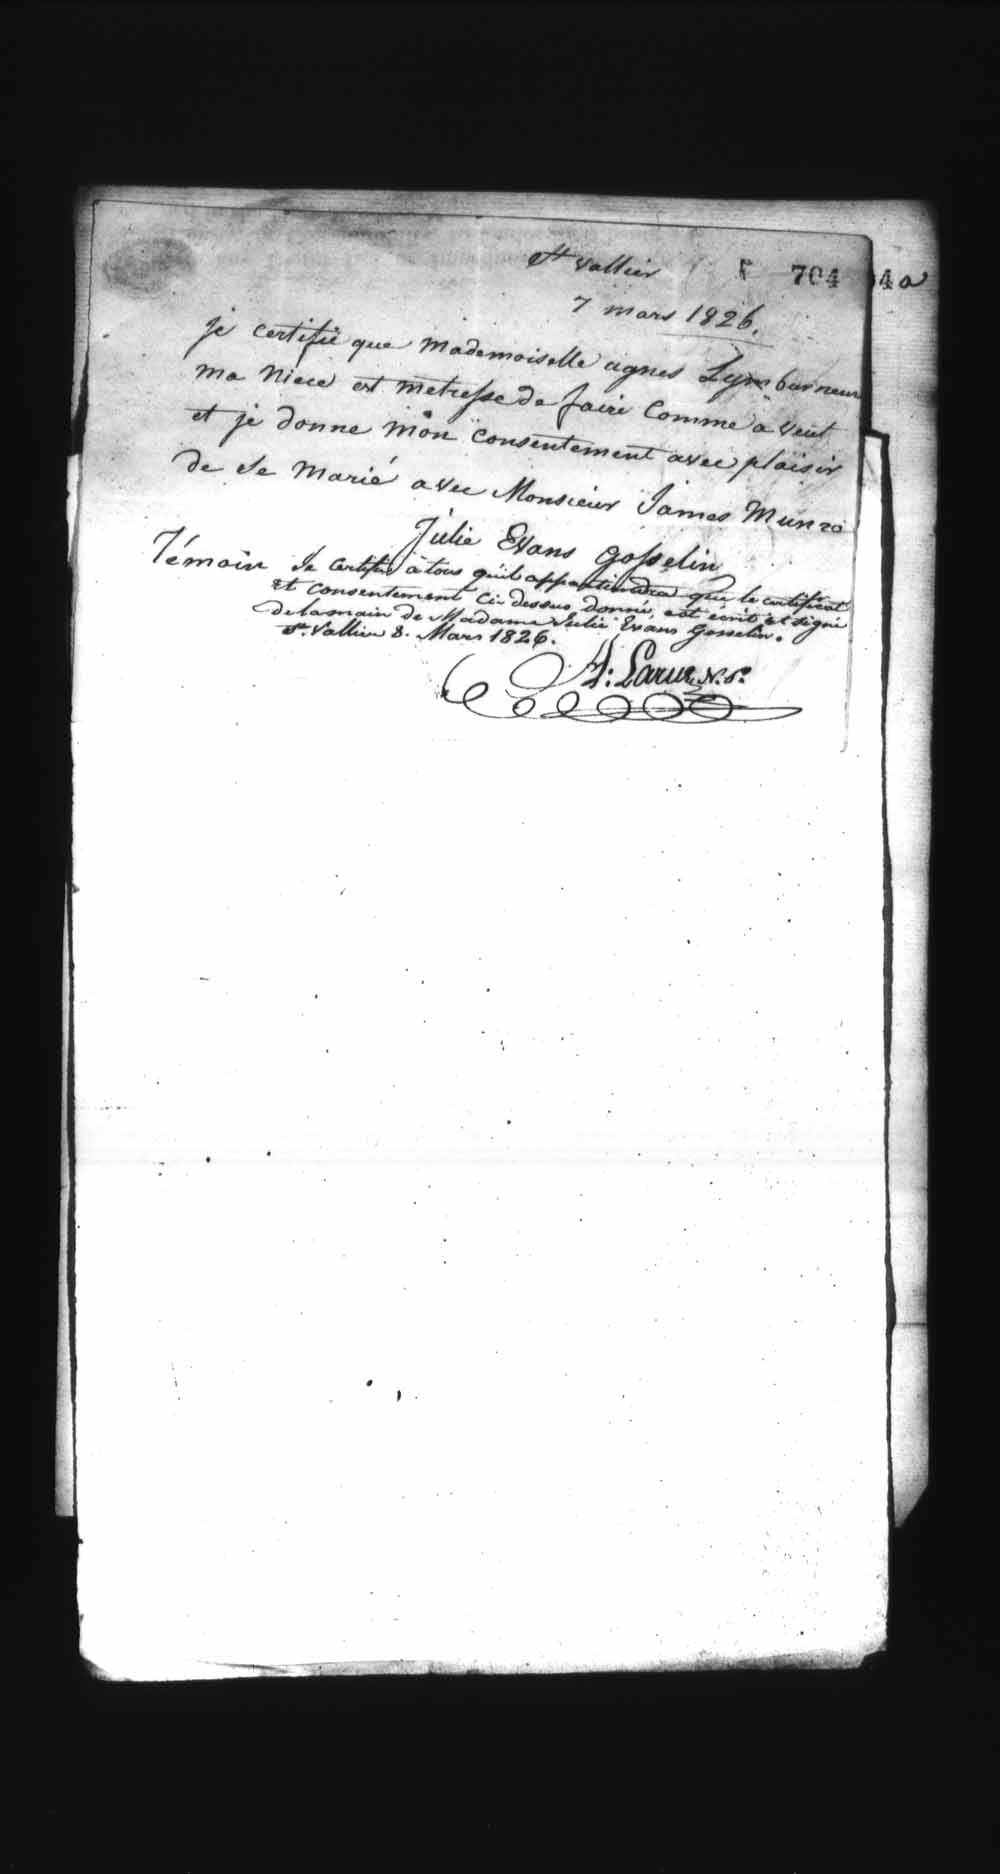 Digitized page of Upper and Lower Canada Marriage Bonds (1779-1865) for Image No.: e008236756